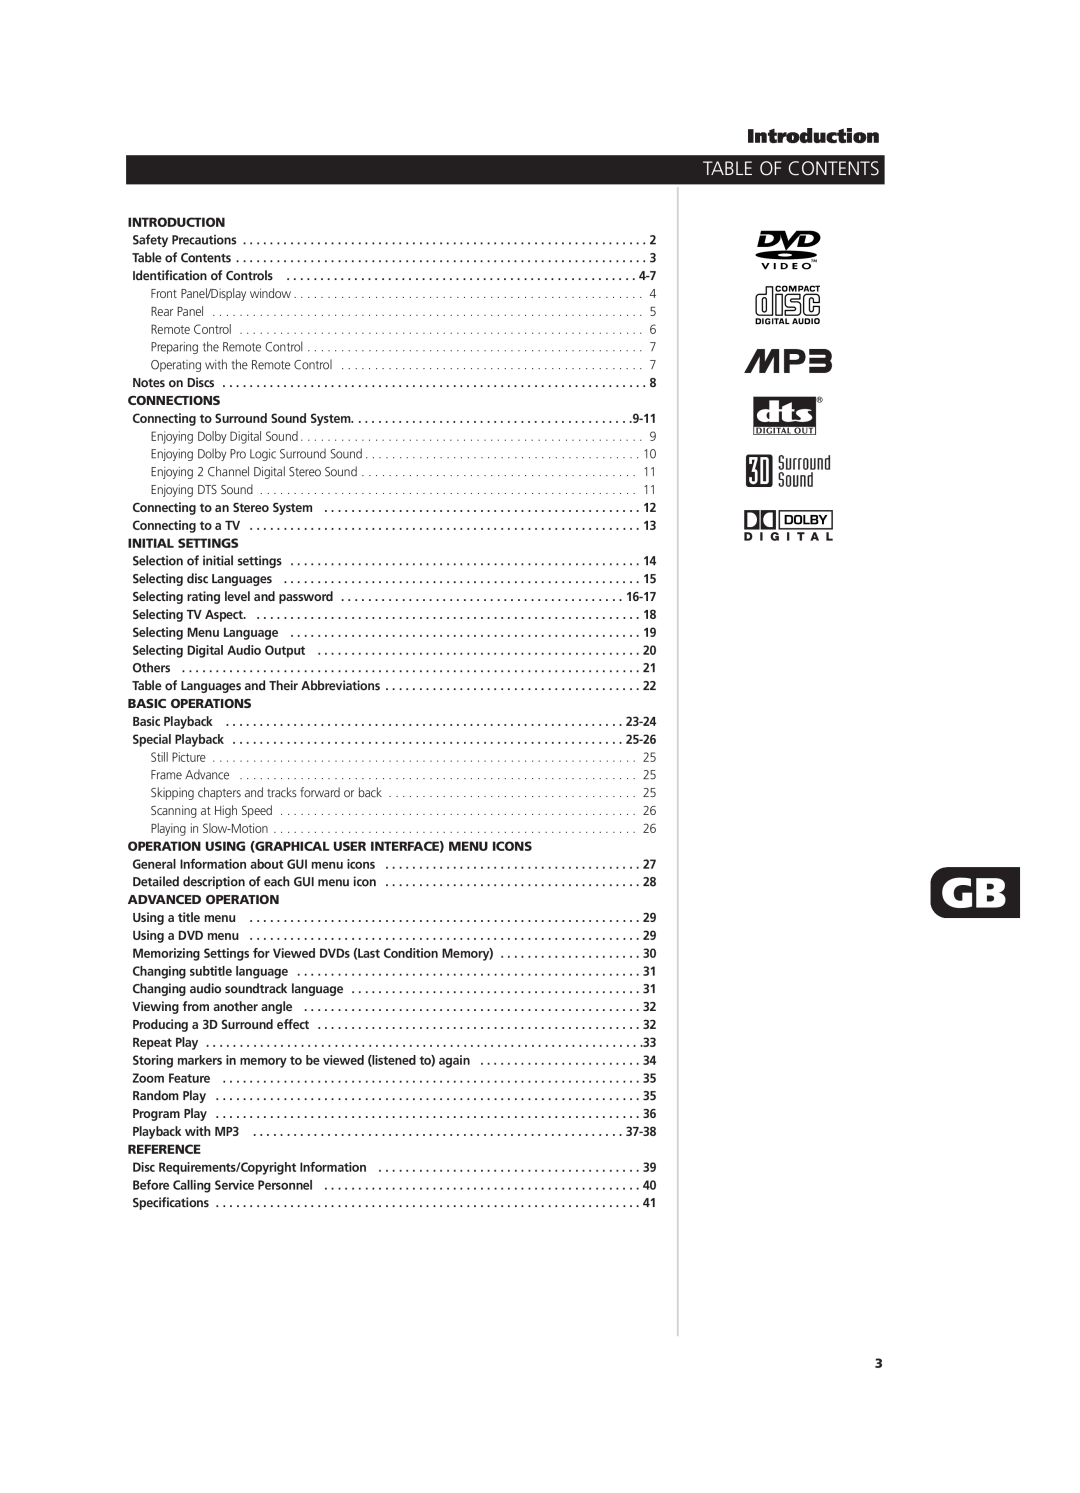 NAD T531 Table Of Contents, Introduction, Connections, Initial Settings, 16-17, Basic Operations, 23-24, 25-26, 37-38 